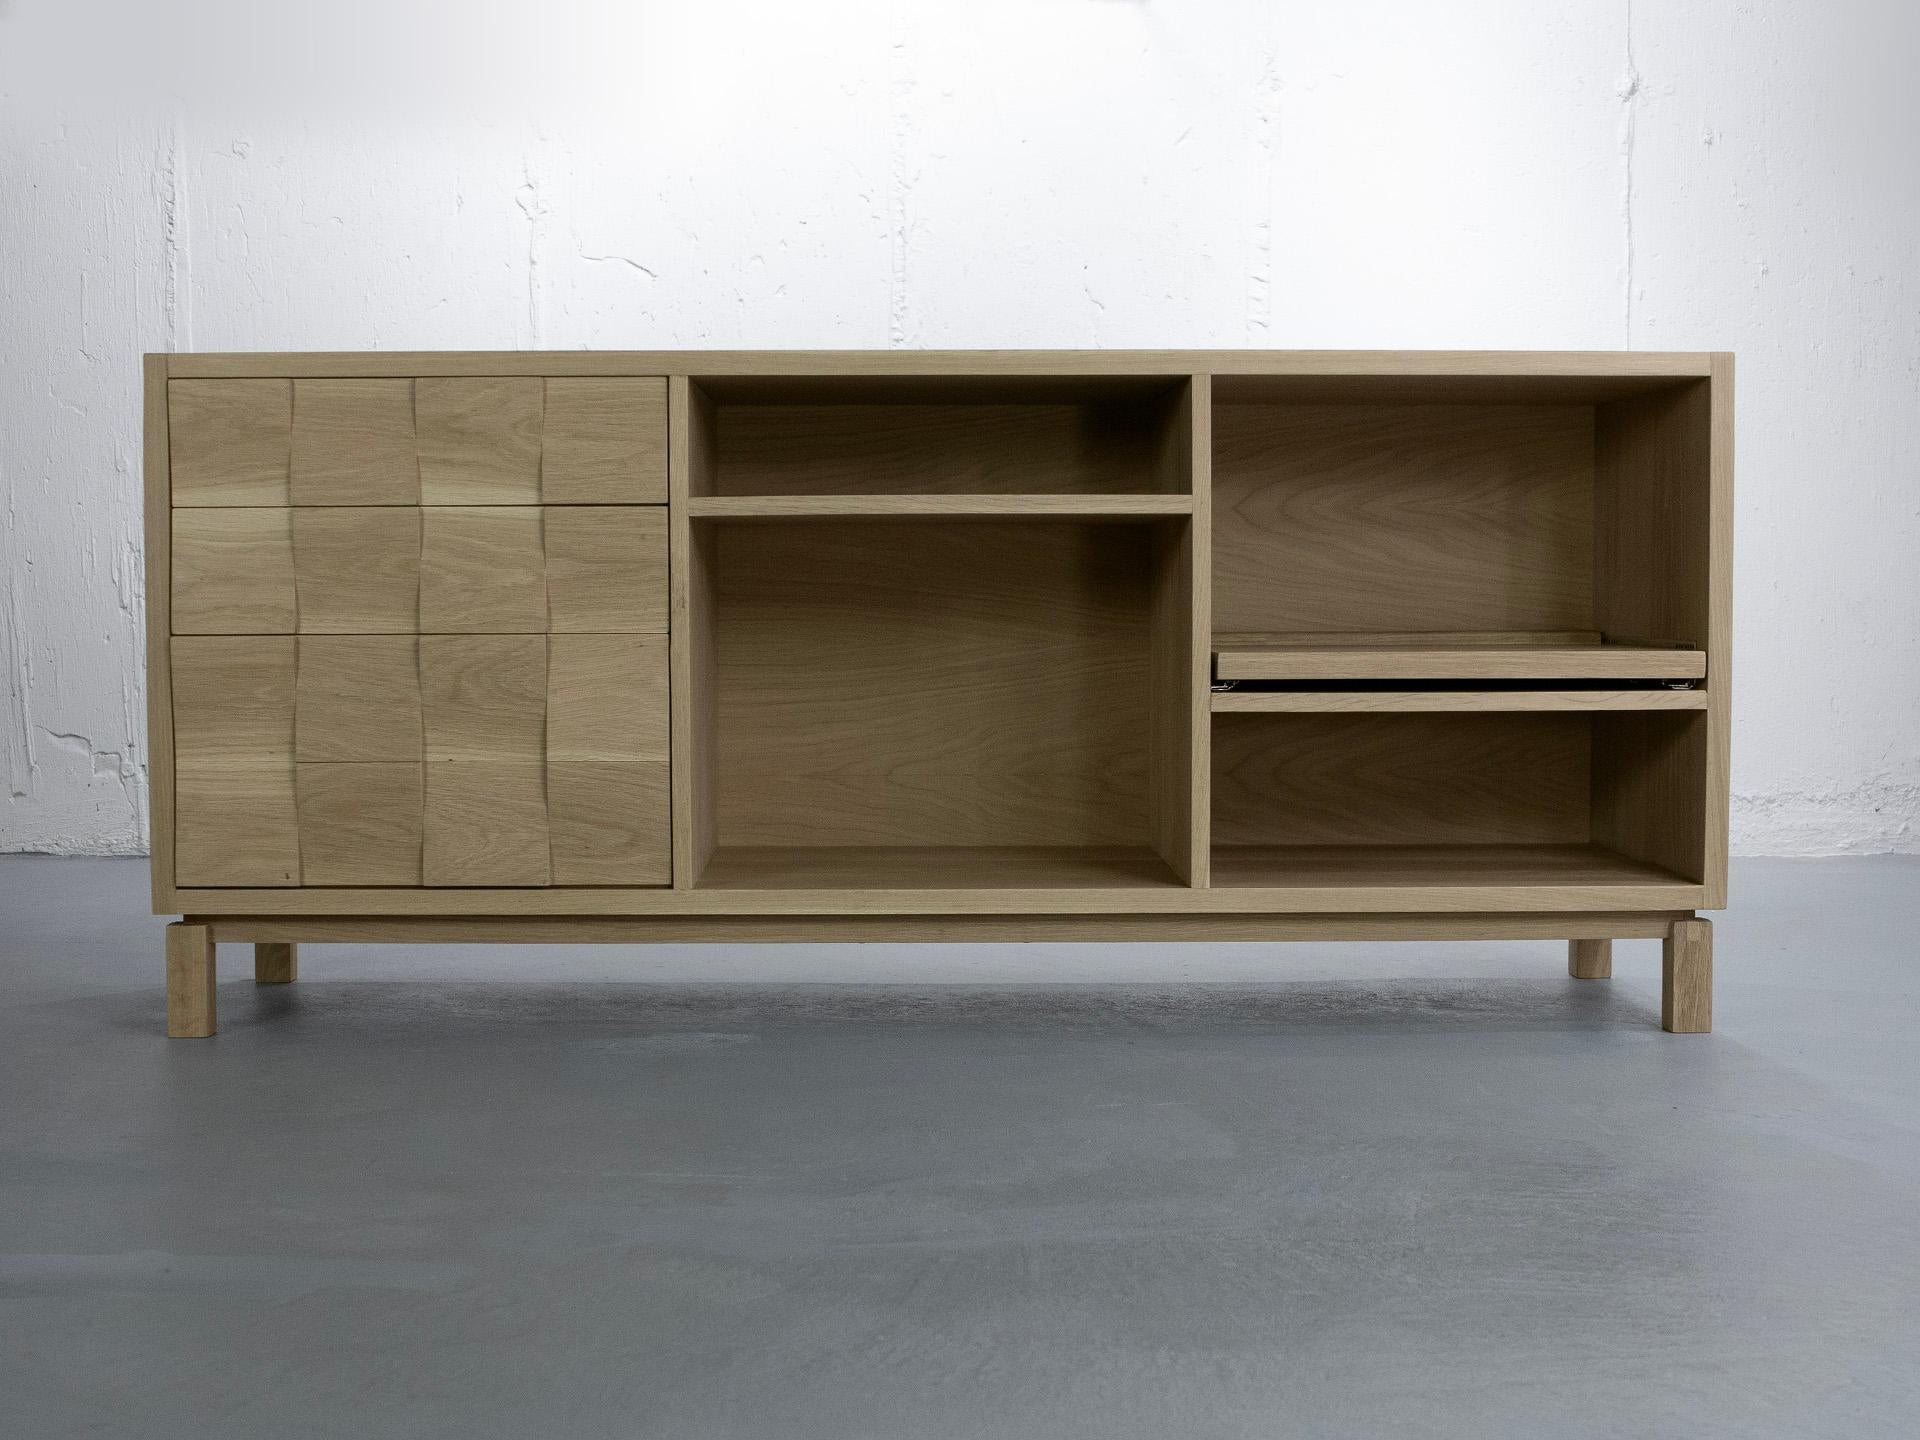 Oak MEDIA CREDENZA in white oak featuring a push to open turntable shelf. For Sale